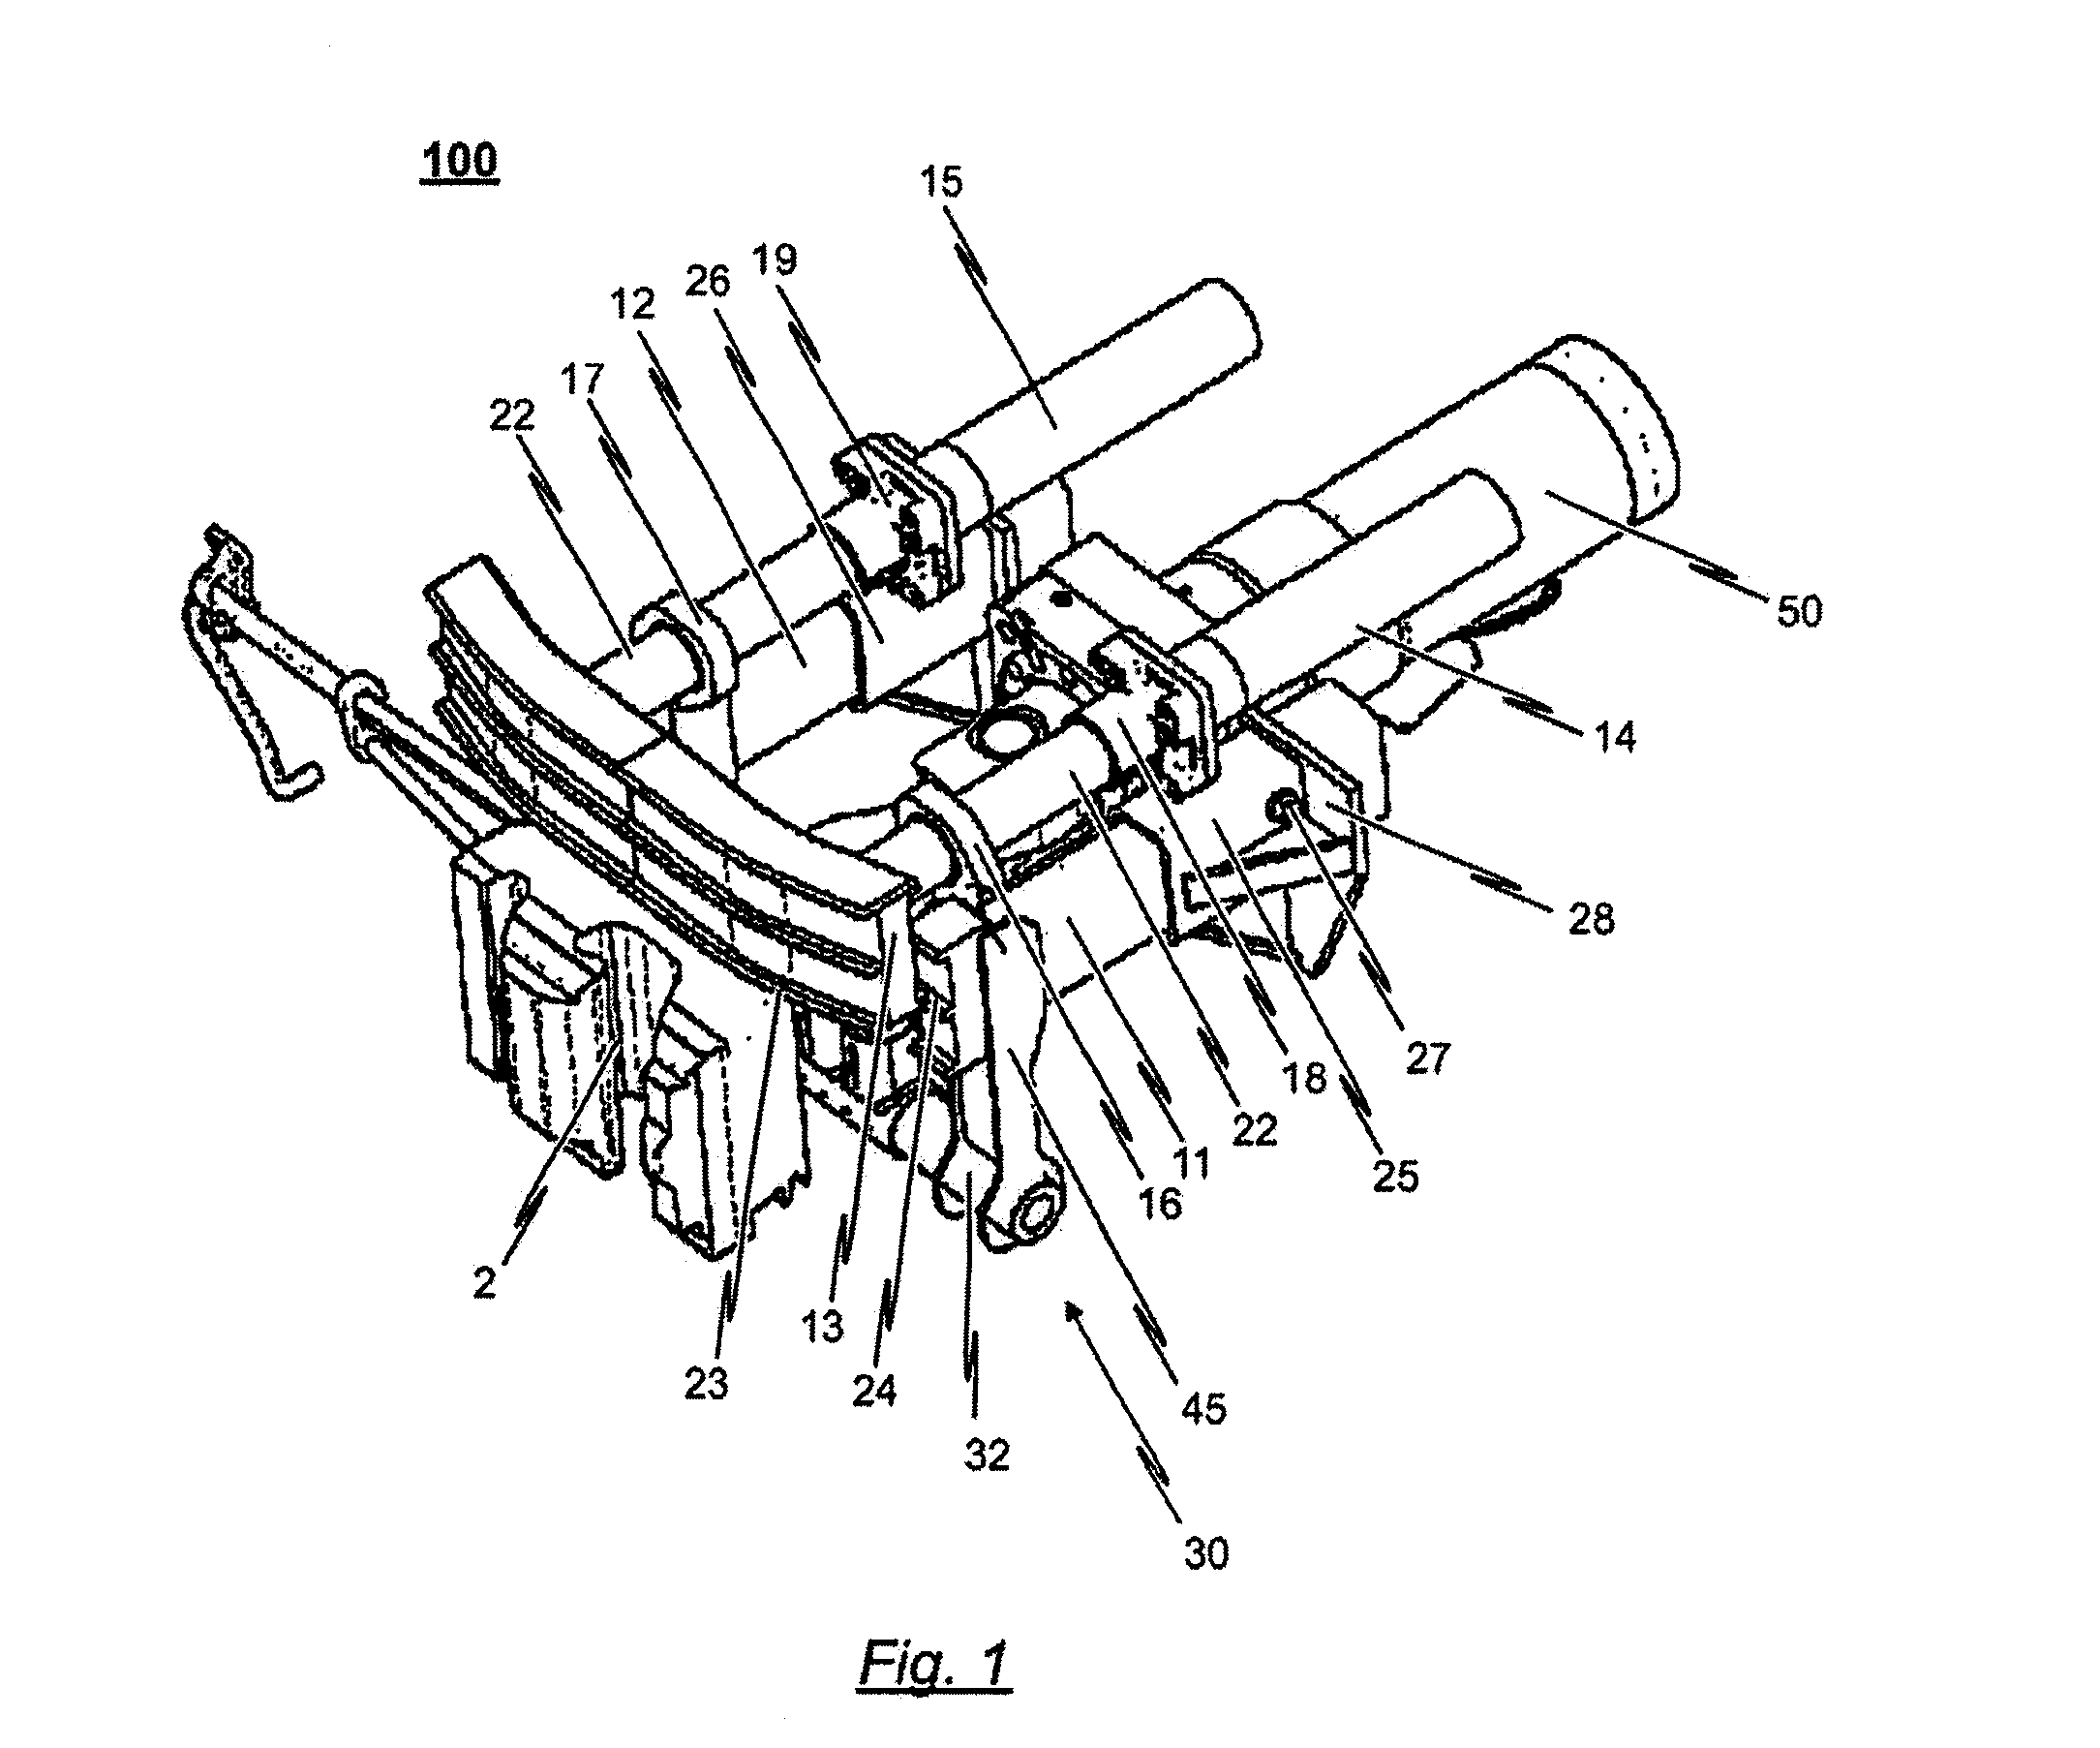 Coupling arrangement for the front of a tracked vehicle